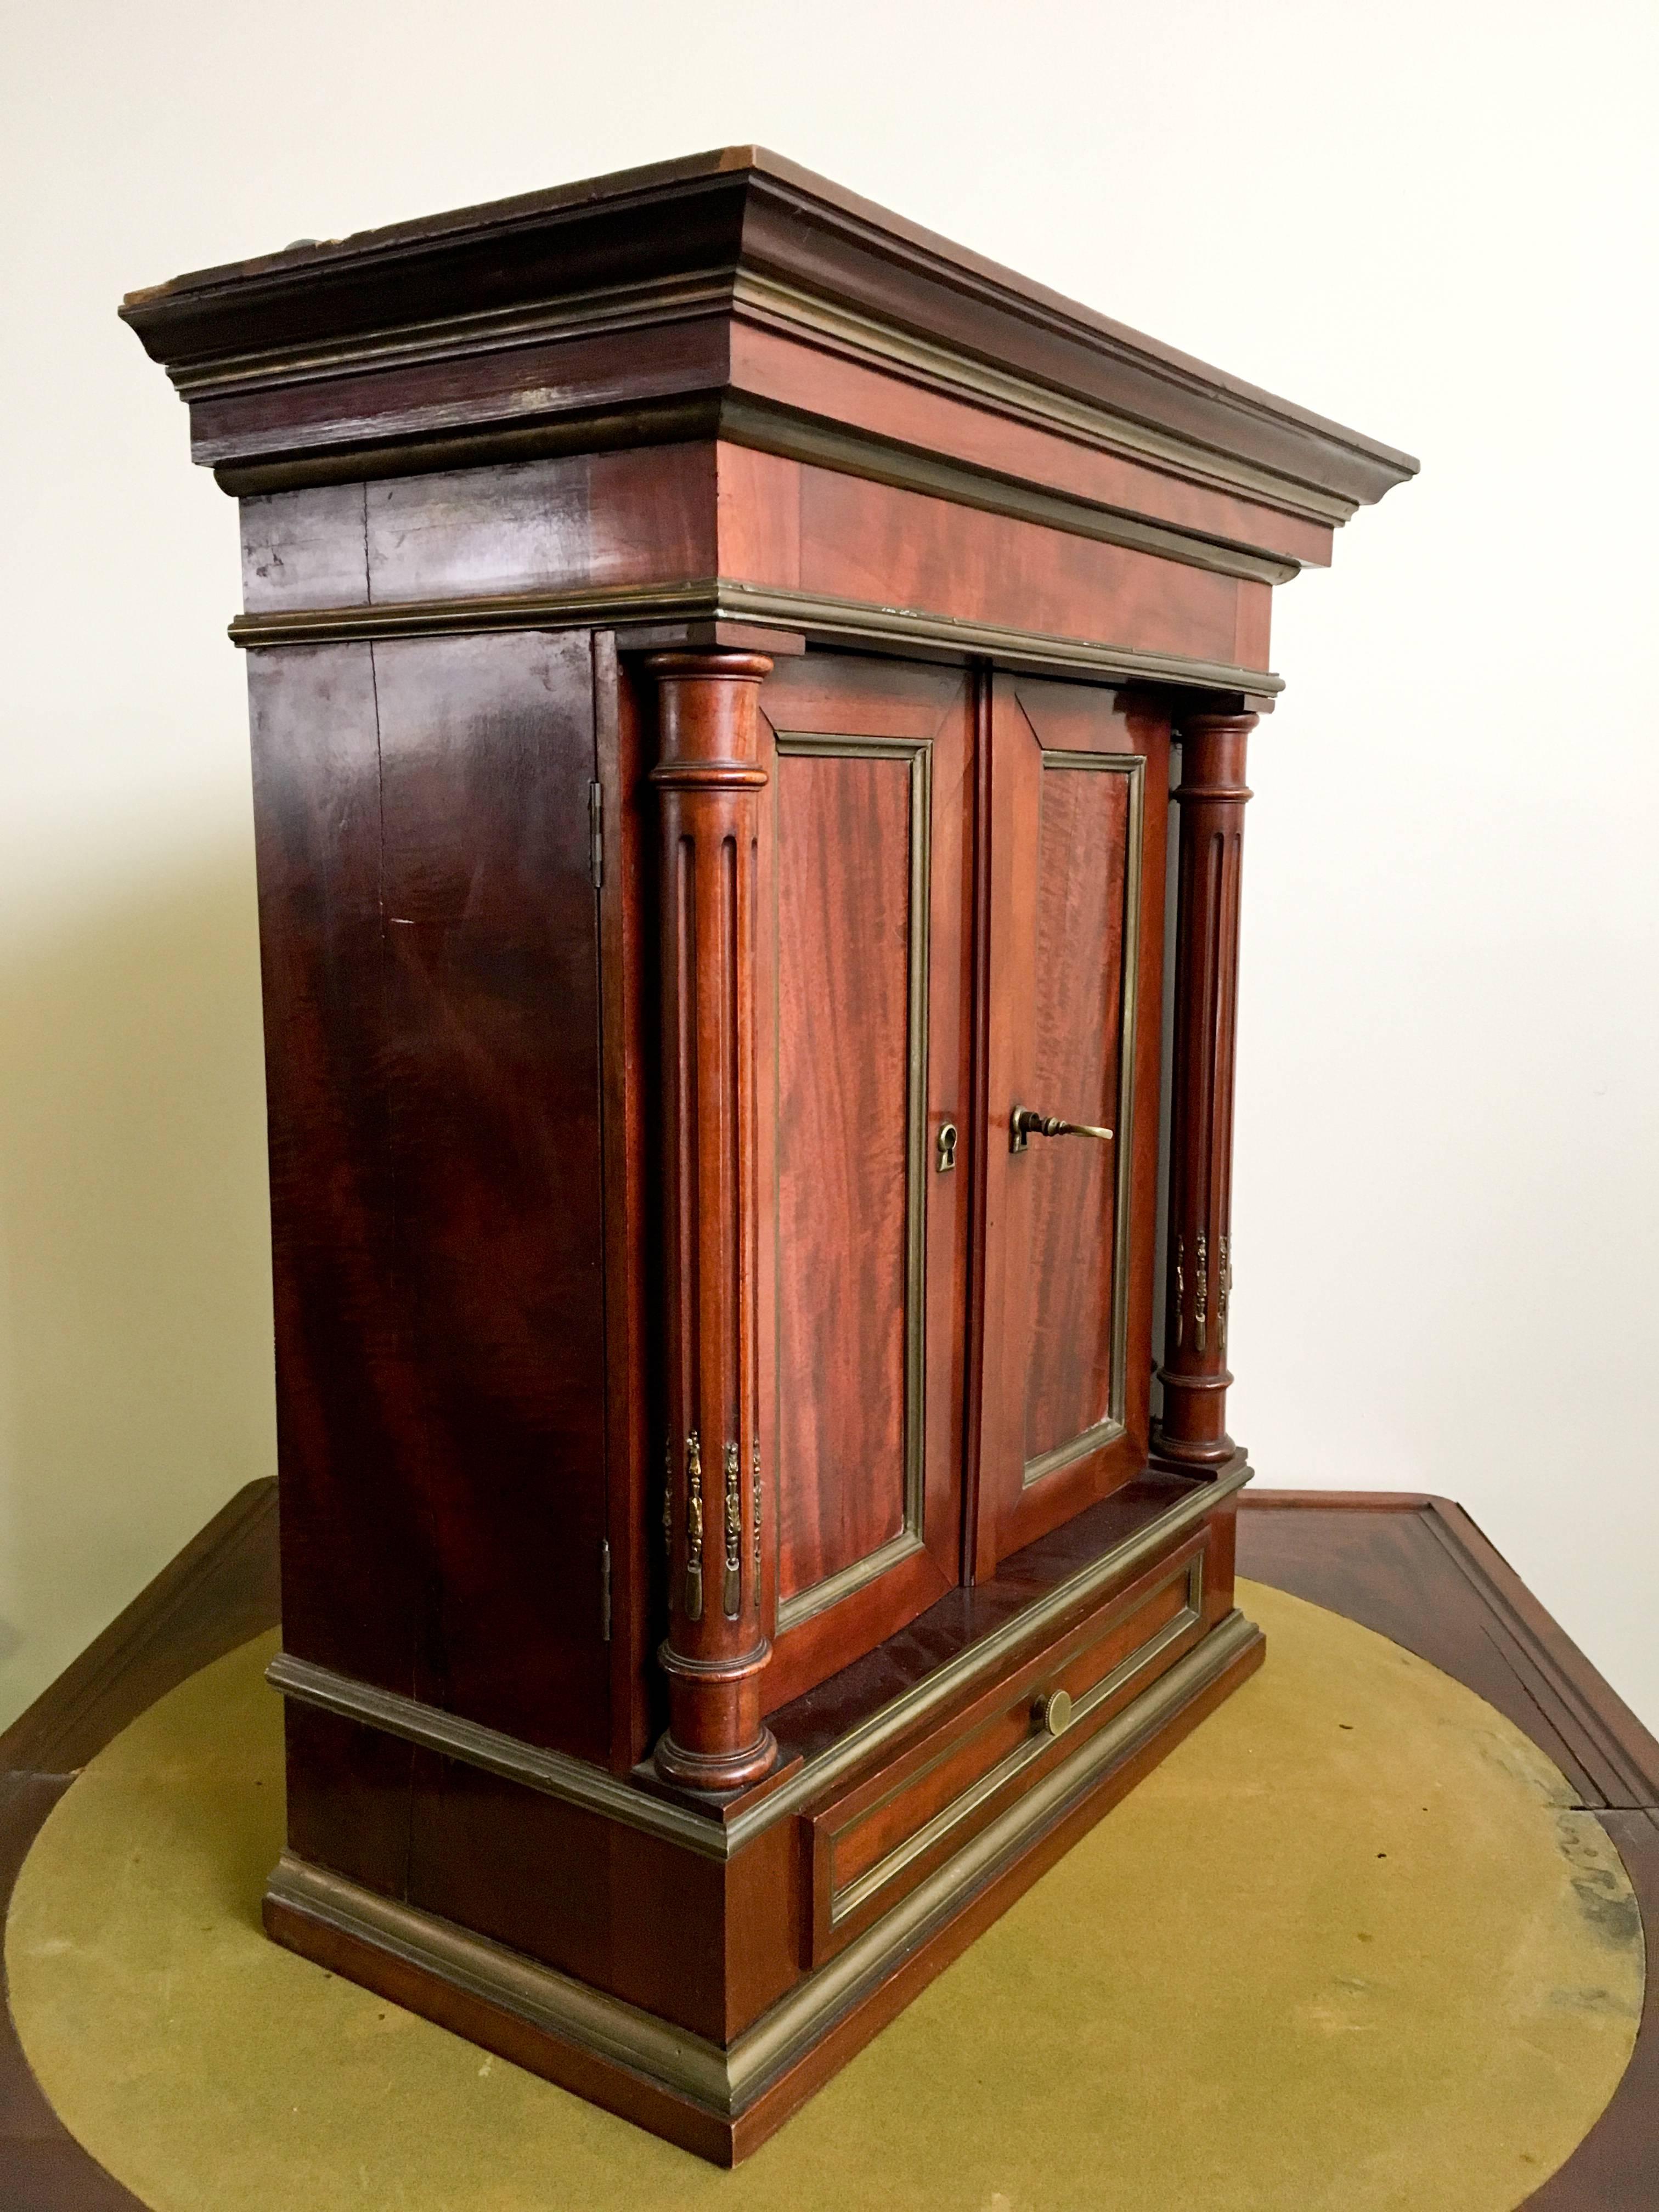 Exclusive mahogany cabinet from Louis XVI epoque.
With gilt bronze ornаments, brass cannelures and three shelves inside and a small drawer infront,
France, circa 1790. The piece is in good condition as you may see from the photos.